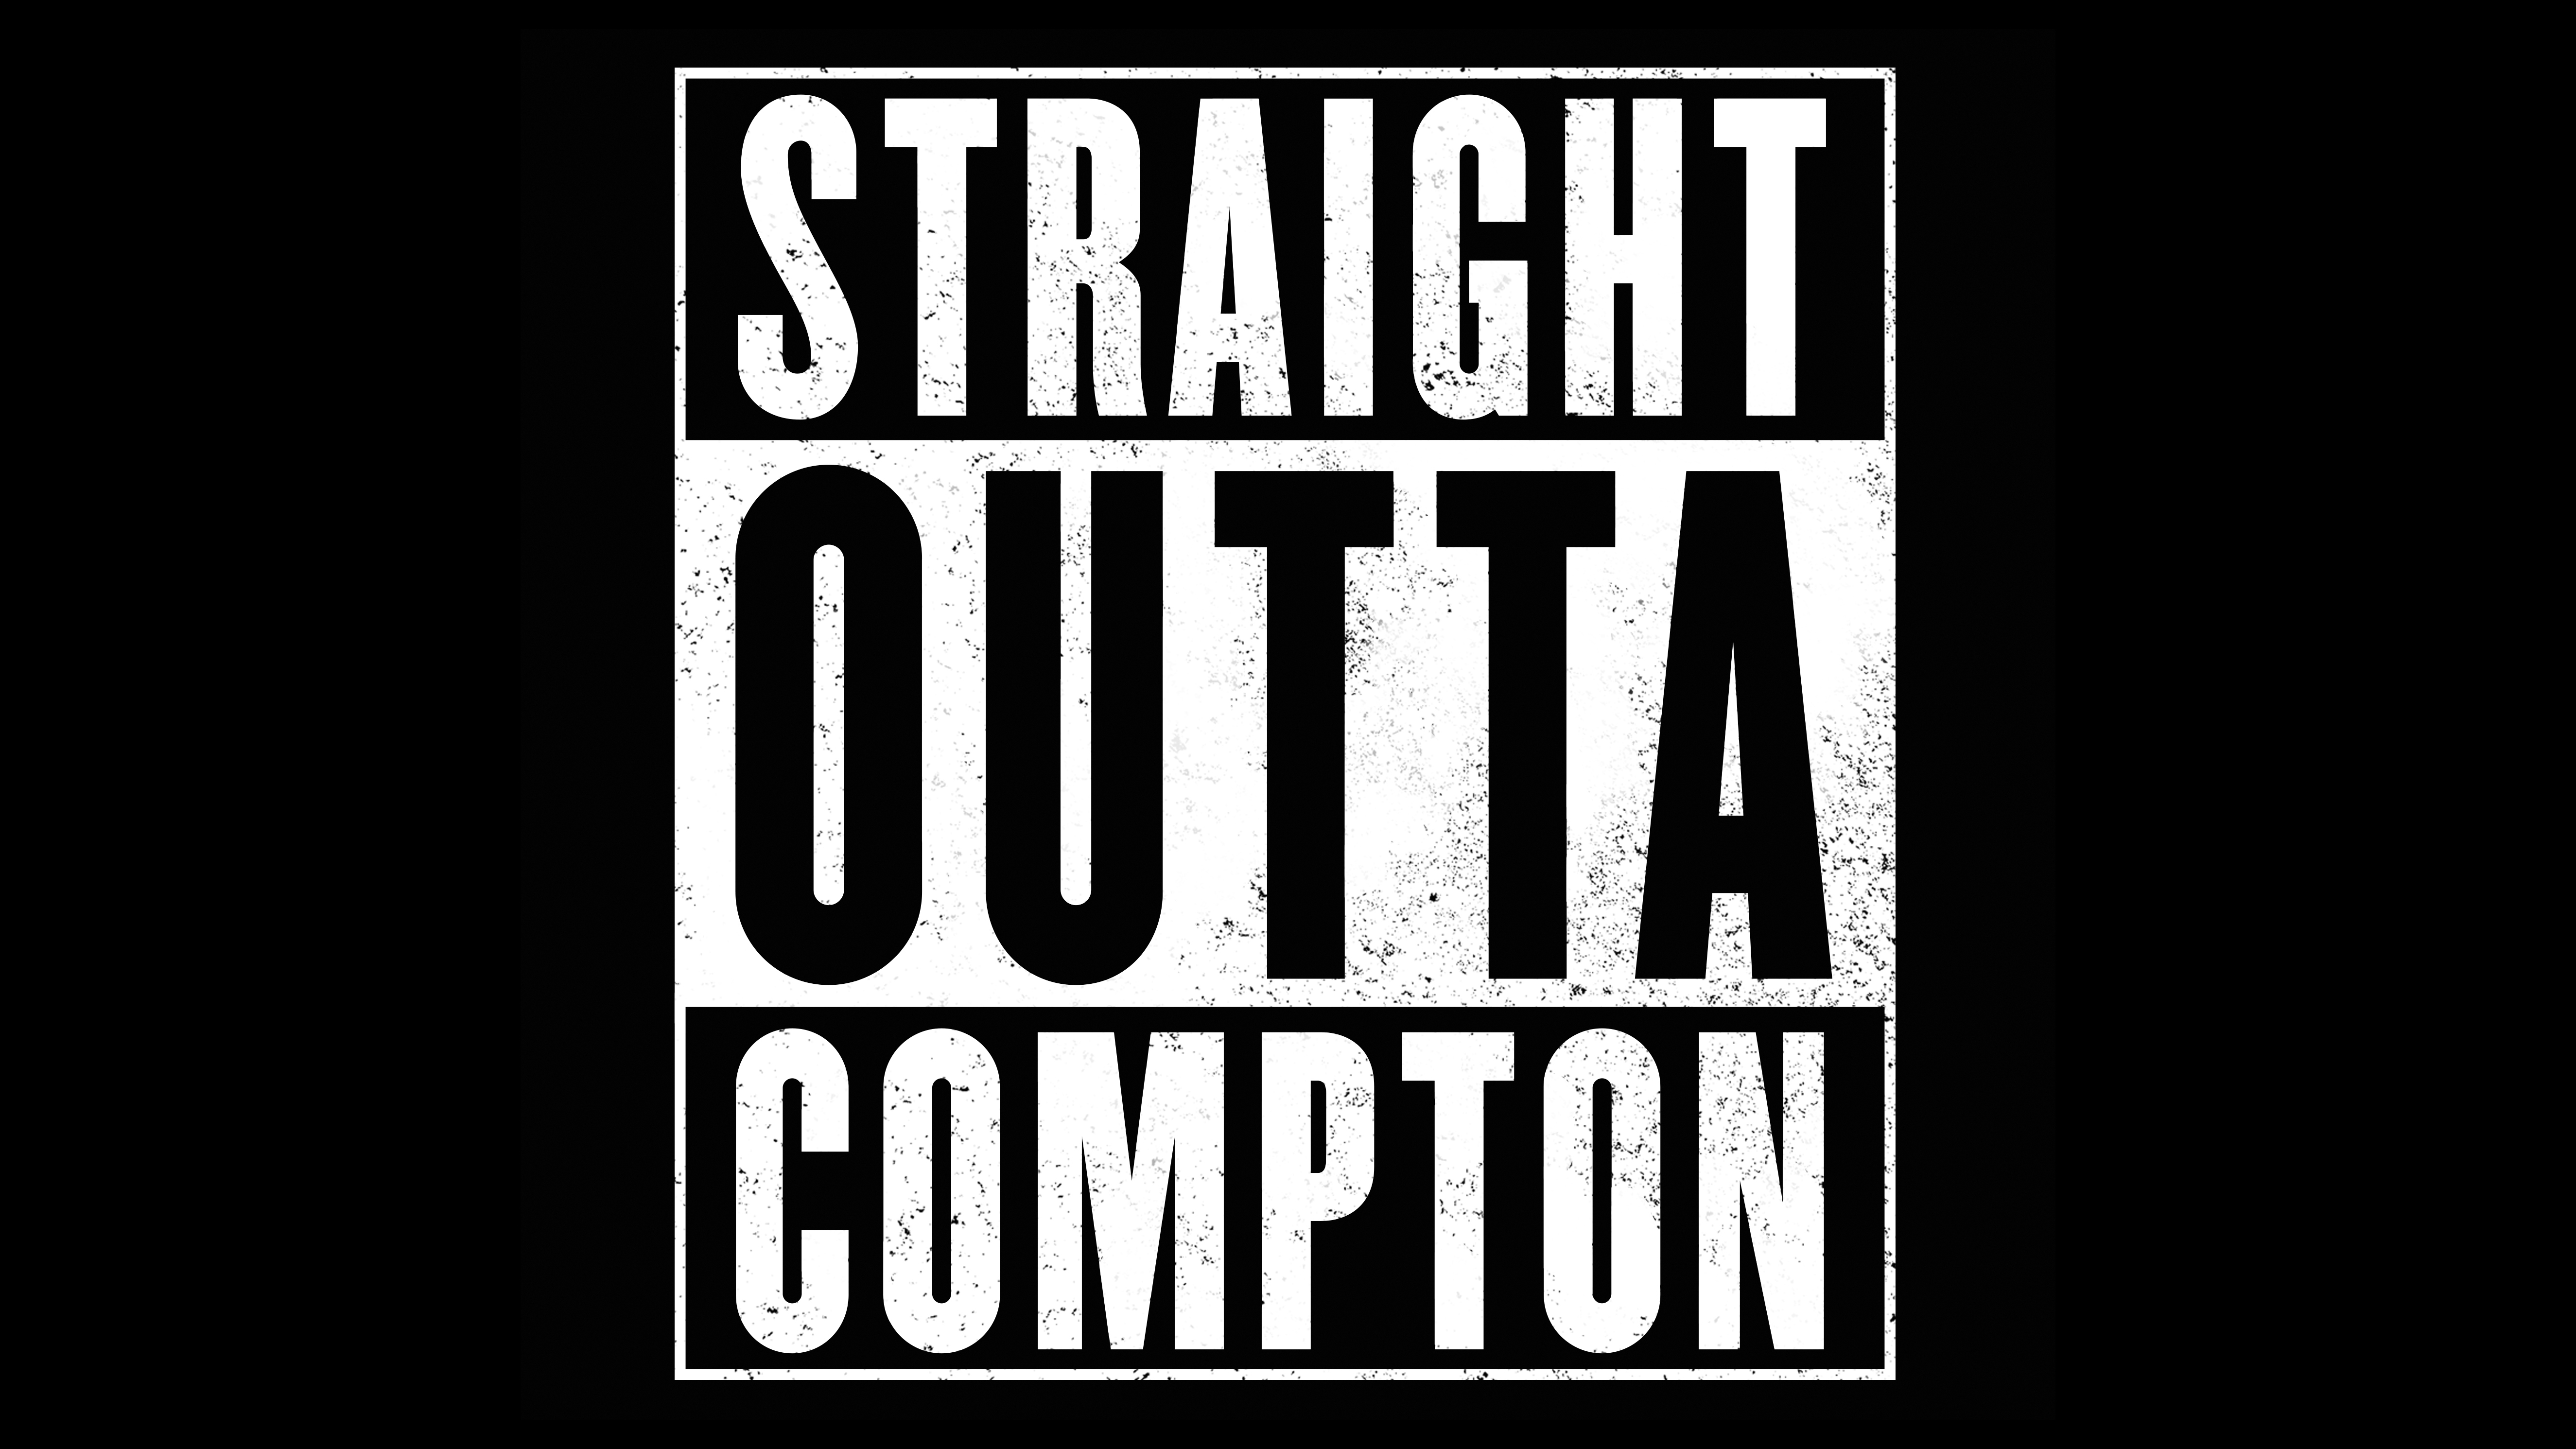 straight outta compton full movie online free watch